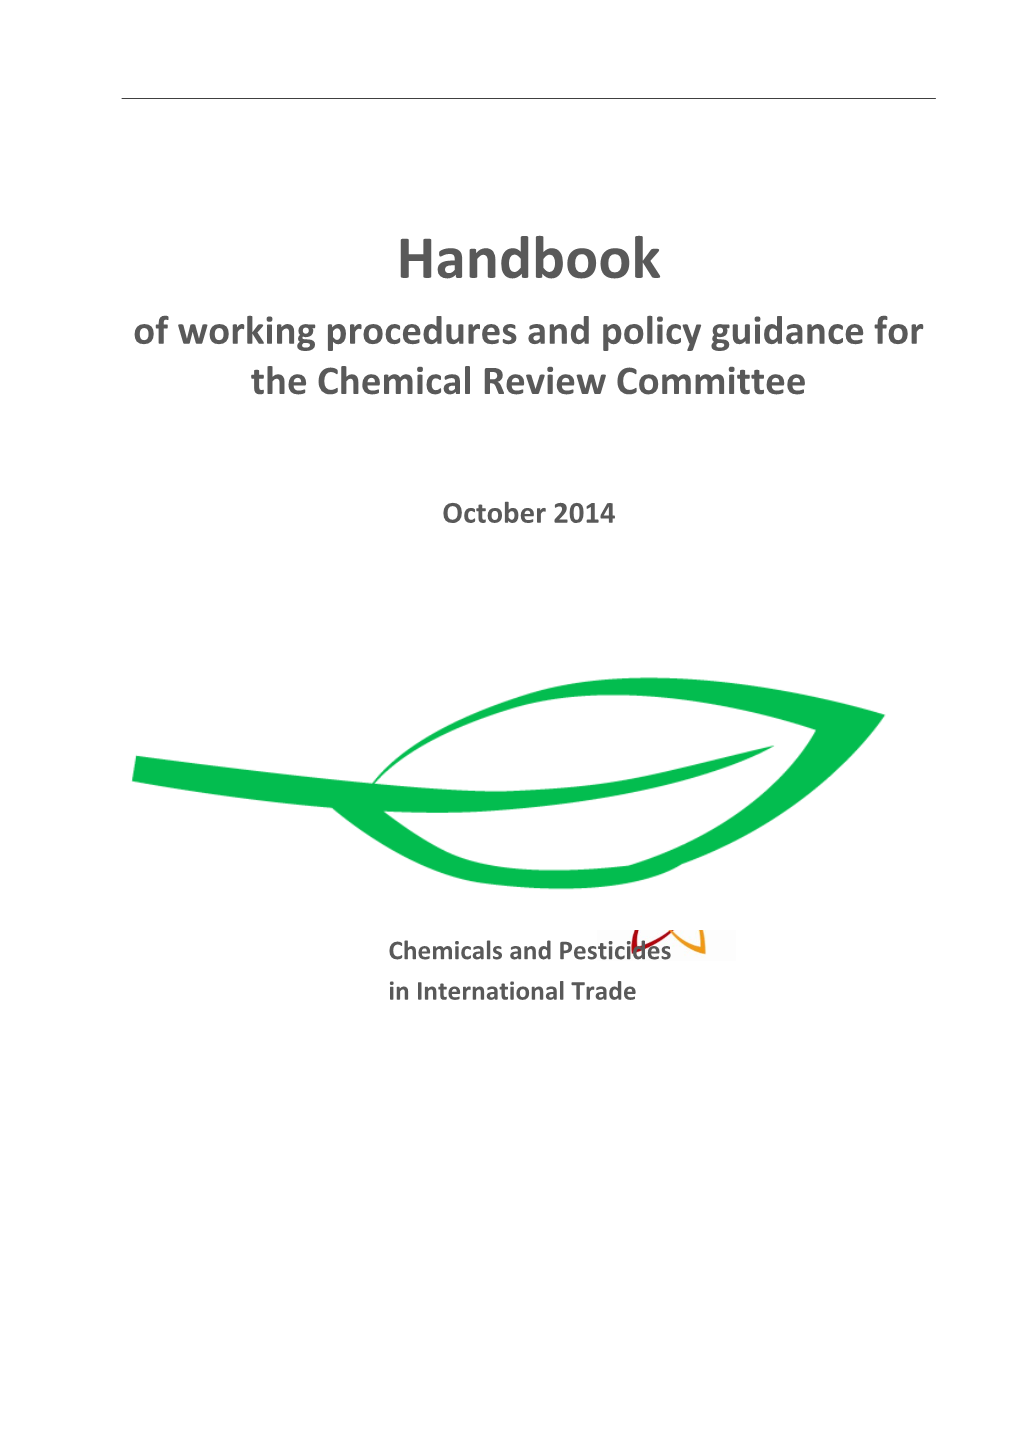 Of Working Procedures and Policy Guidance for the Chemical Review Committee